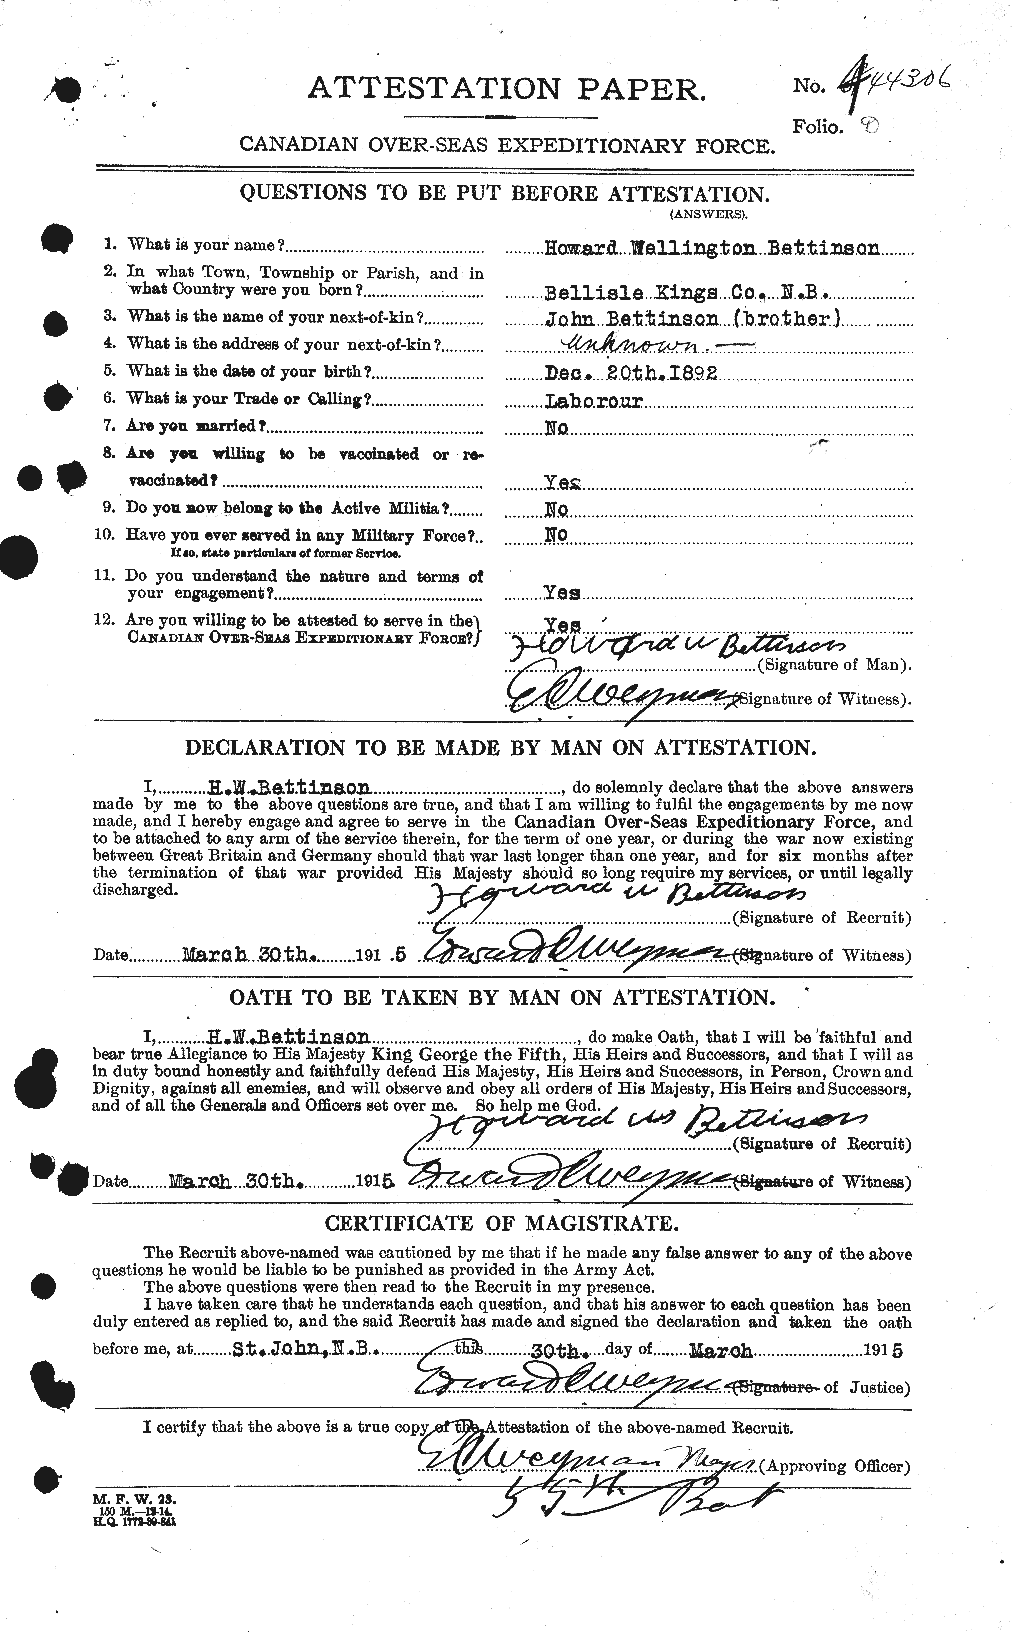 Personnel Records of the First World War - CEF 237114a